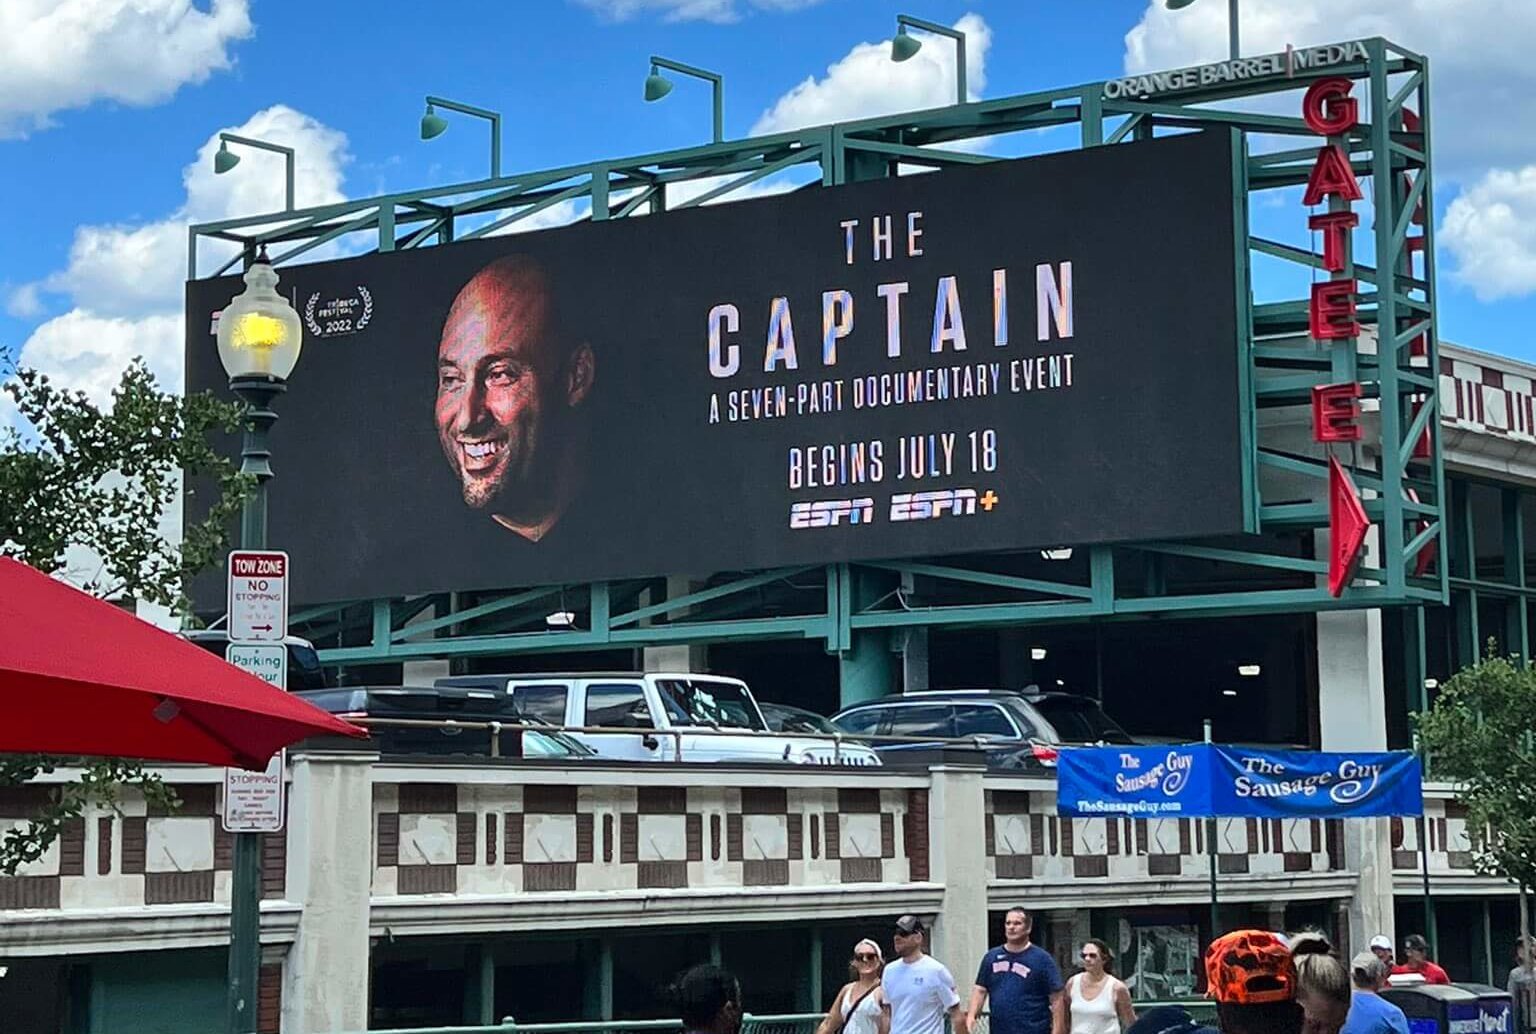 Derek Jeter Documentary: How to Watch 'The Captain' Online for